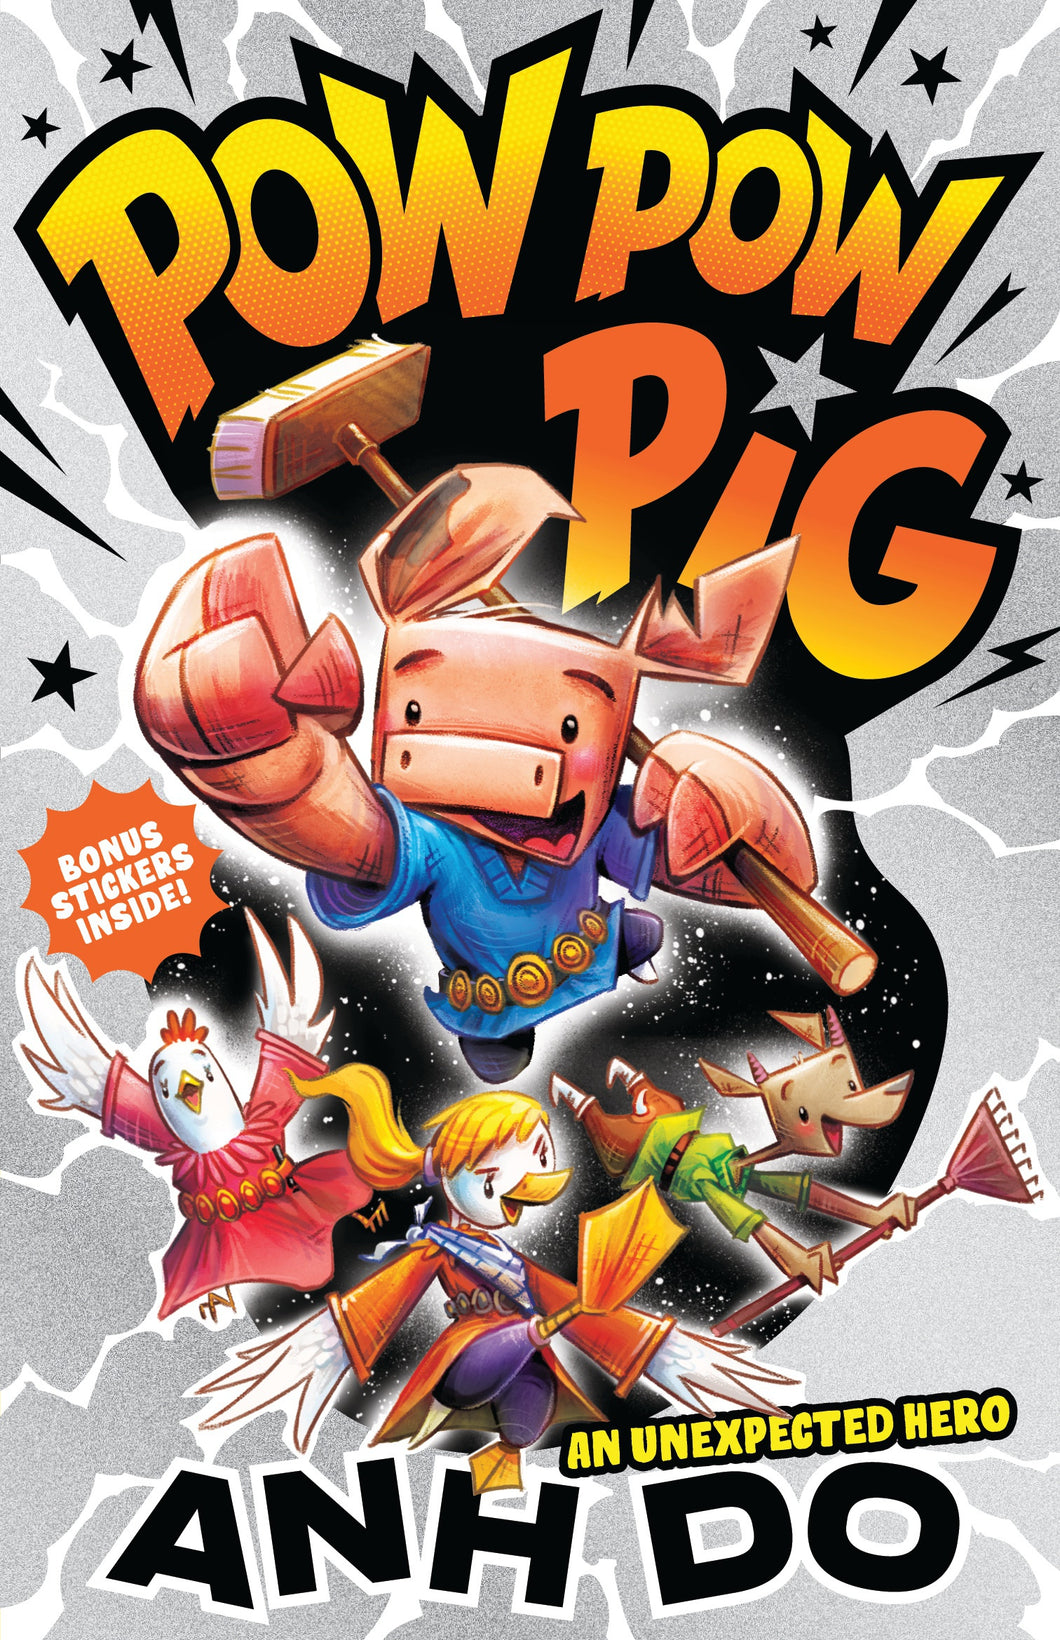 Pow Pow Pig #1 An Unexpected Hero by Anh Do